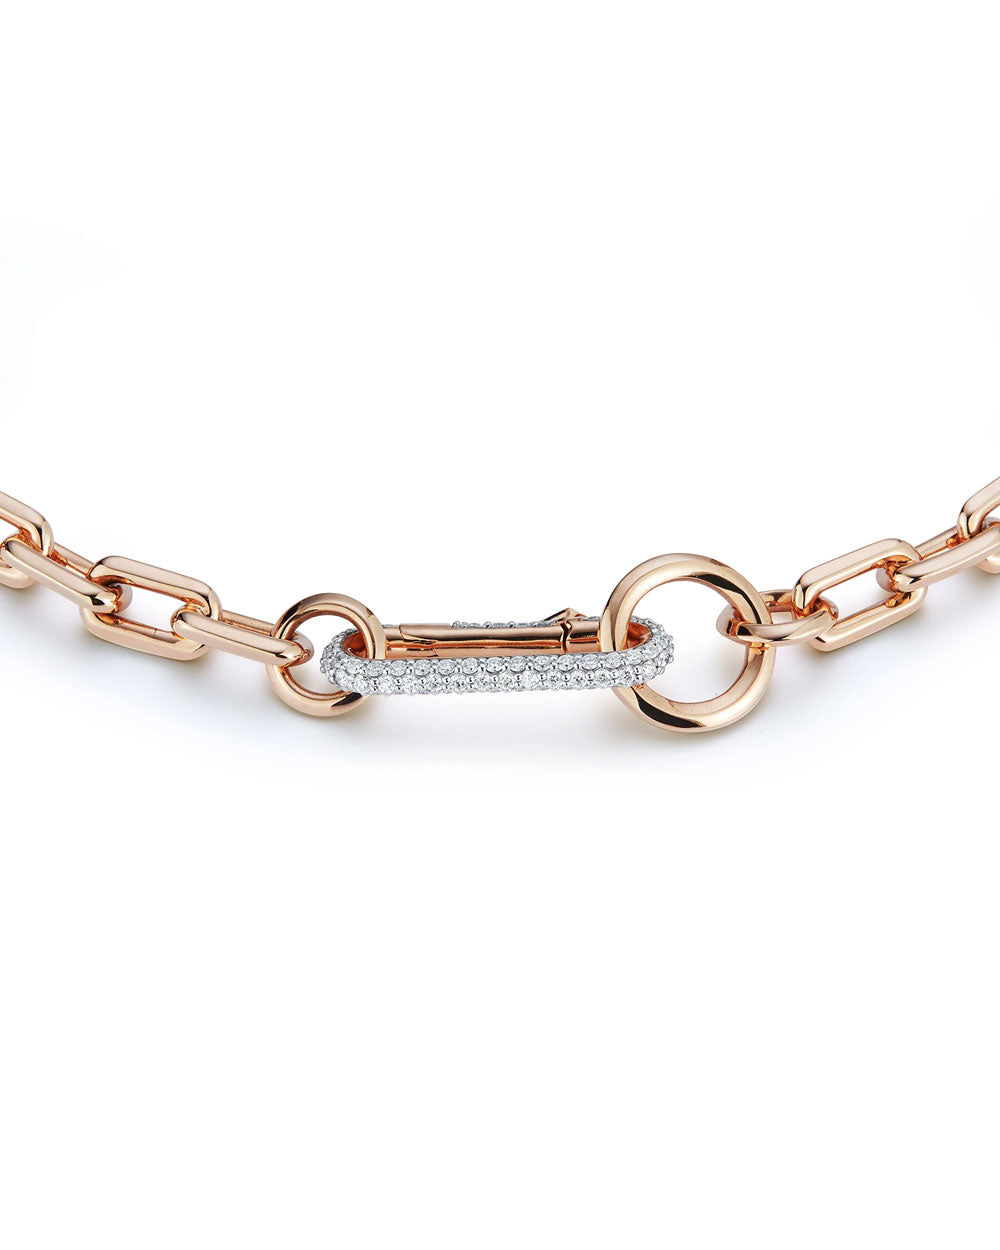 Saxon Rose Gold Chain Link Necklace with Elongated Diamond Link Clasp